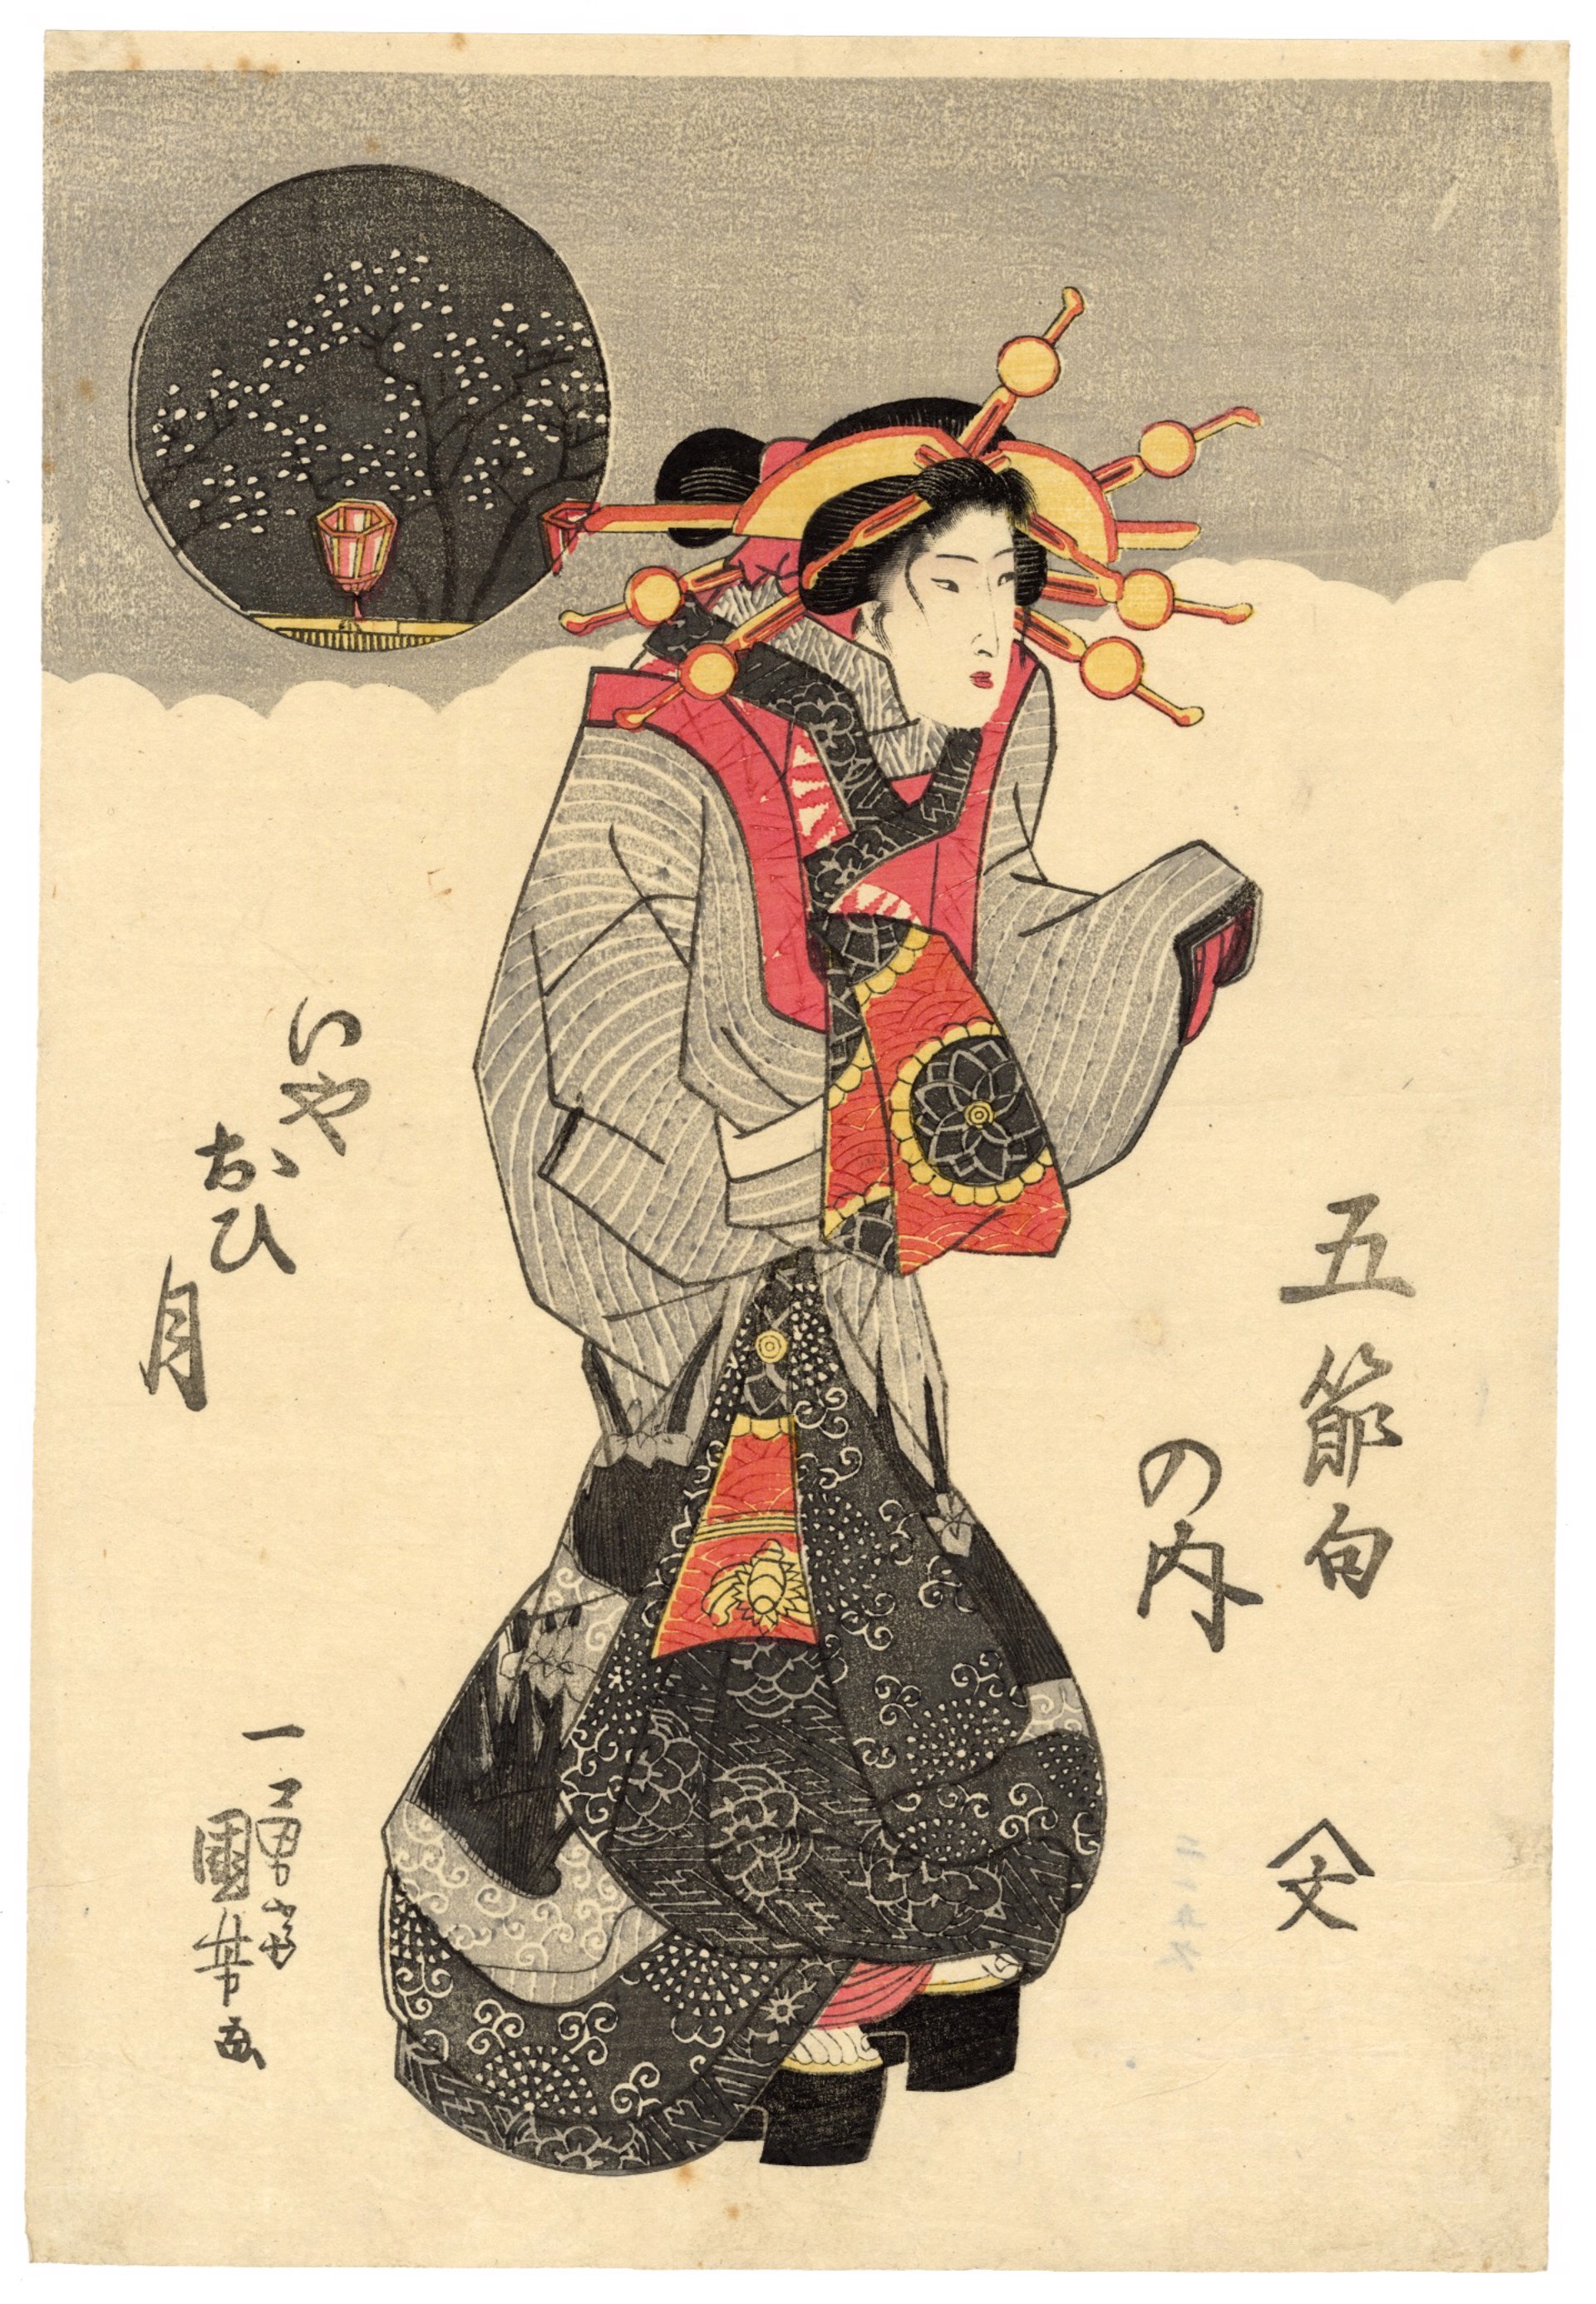 Tanabata or Star Festival on the 7th night of July by Kuniyoshi